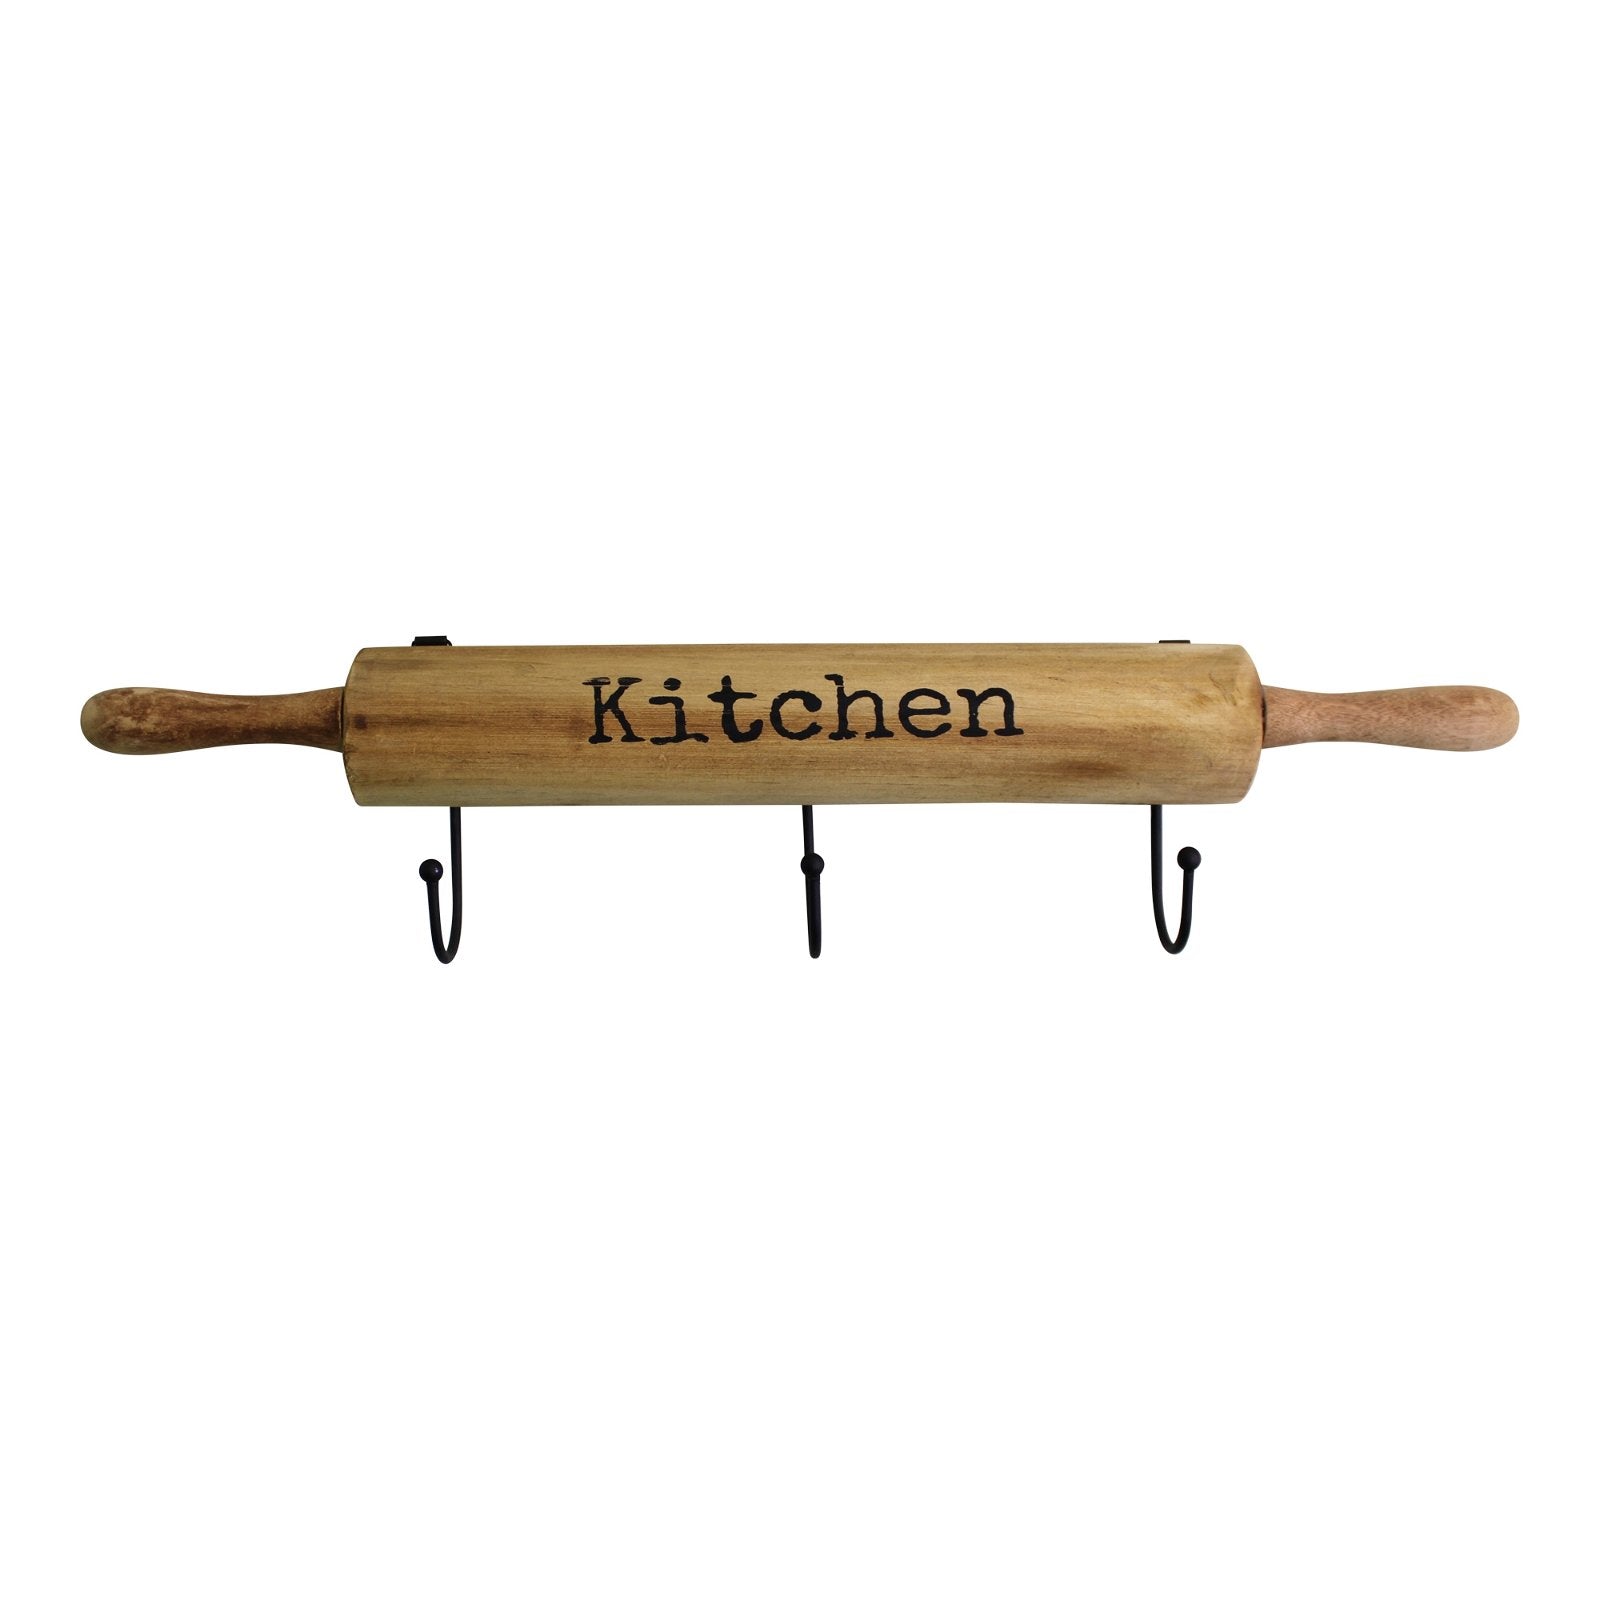 View Kitchen Wall Hooks 4 Hooks with a Rolling Pin Design information